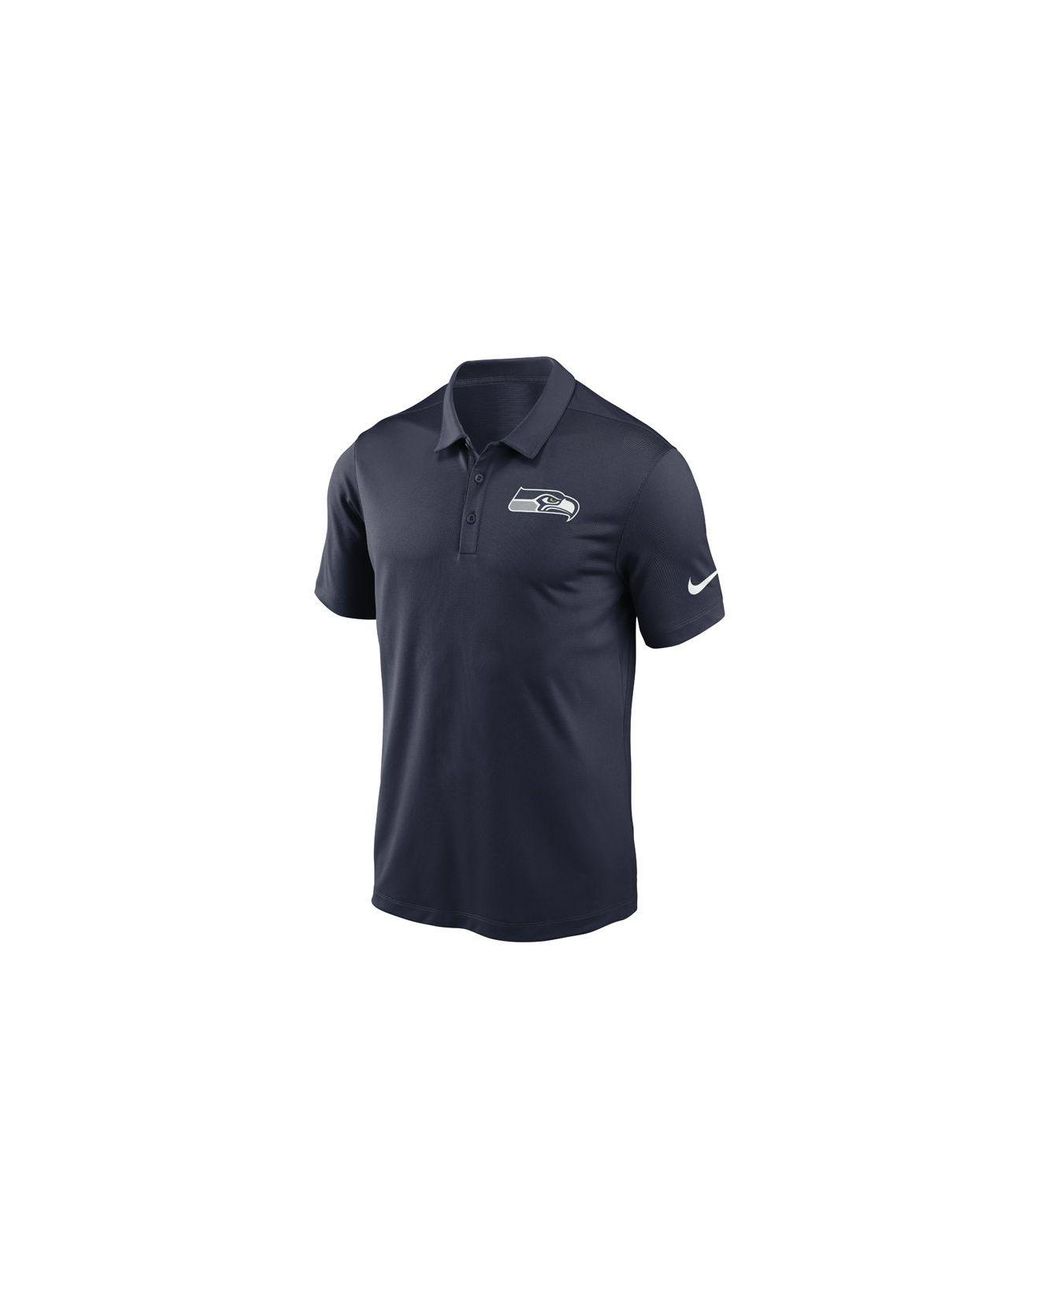 Nike Synthetic Team Logo Franchise Polo in Navy (Blue) for Men - Lyst